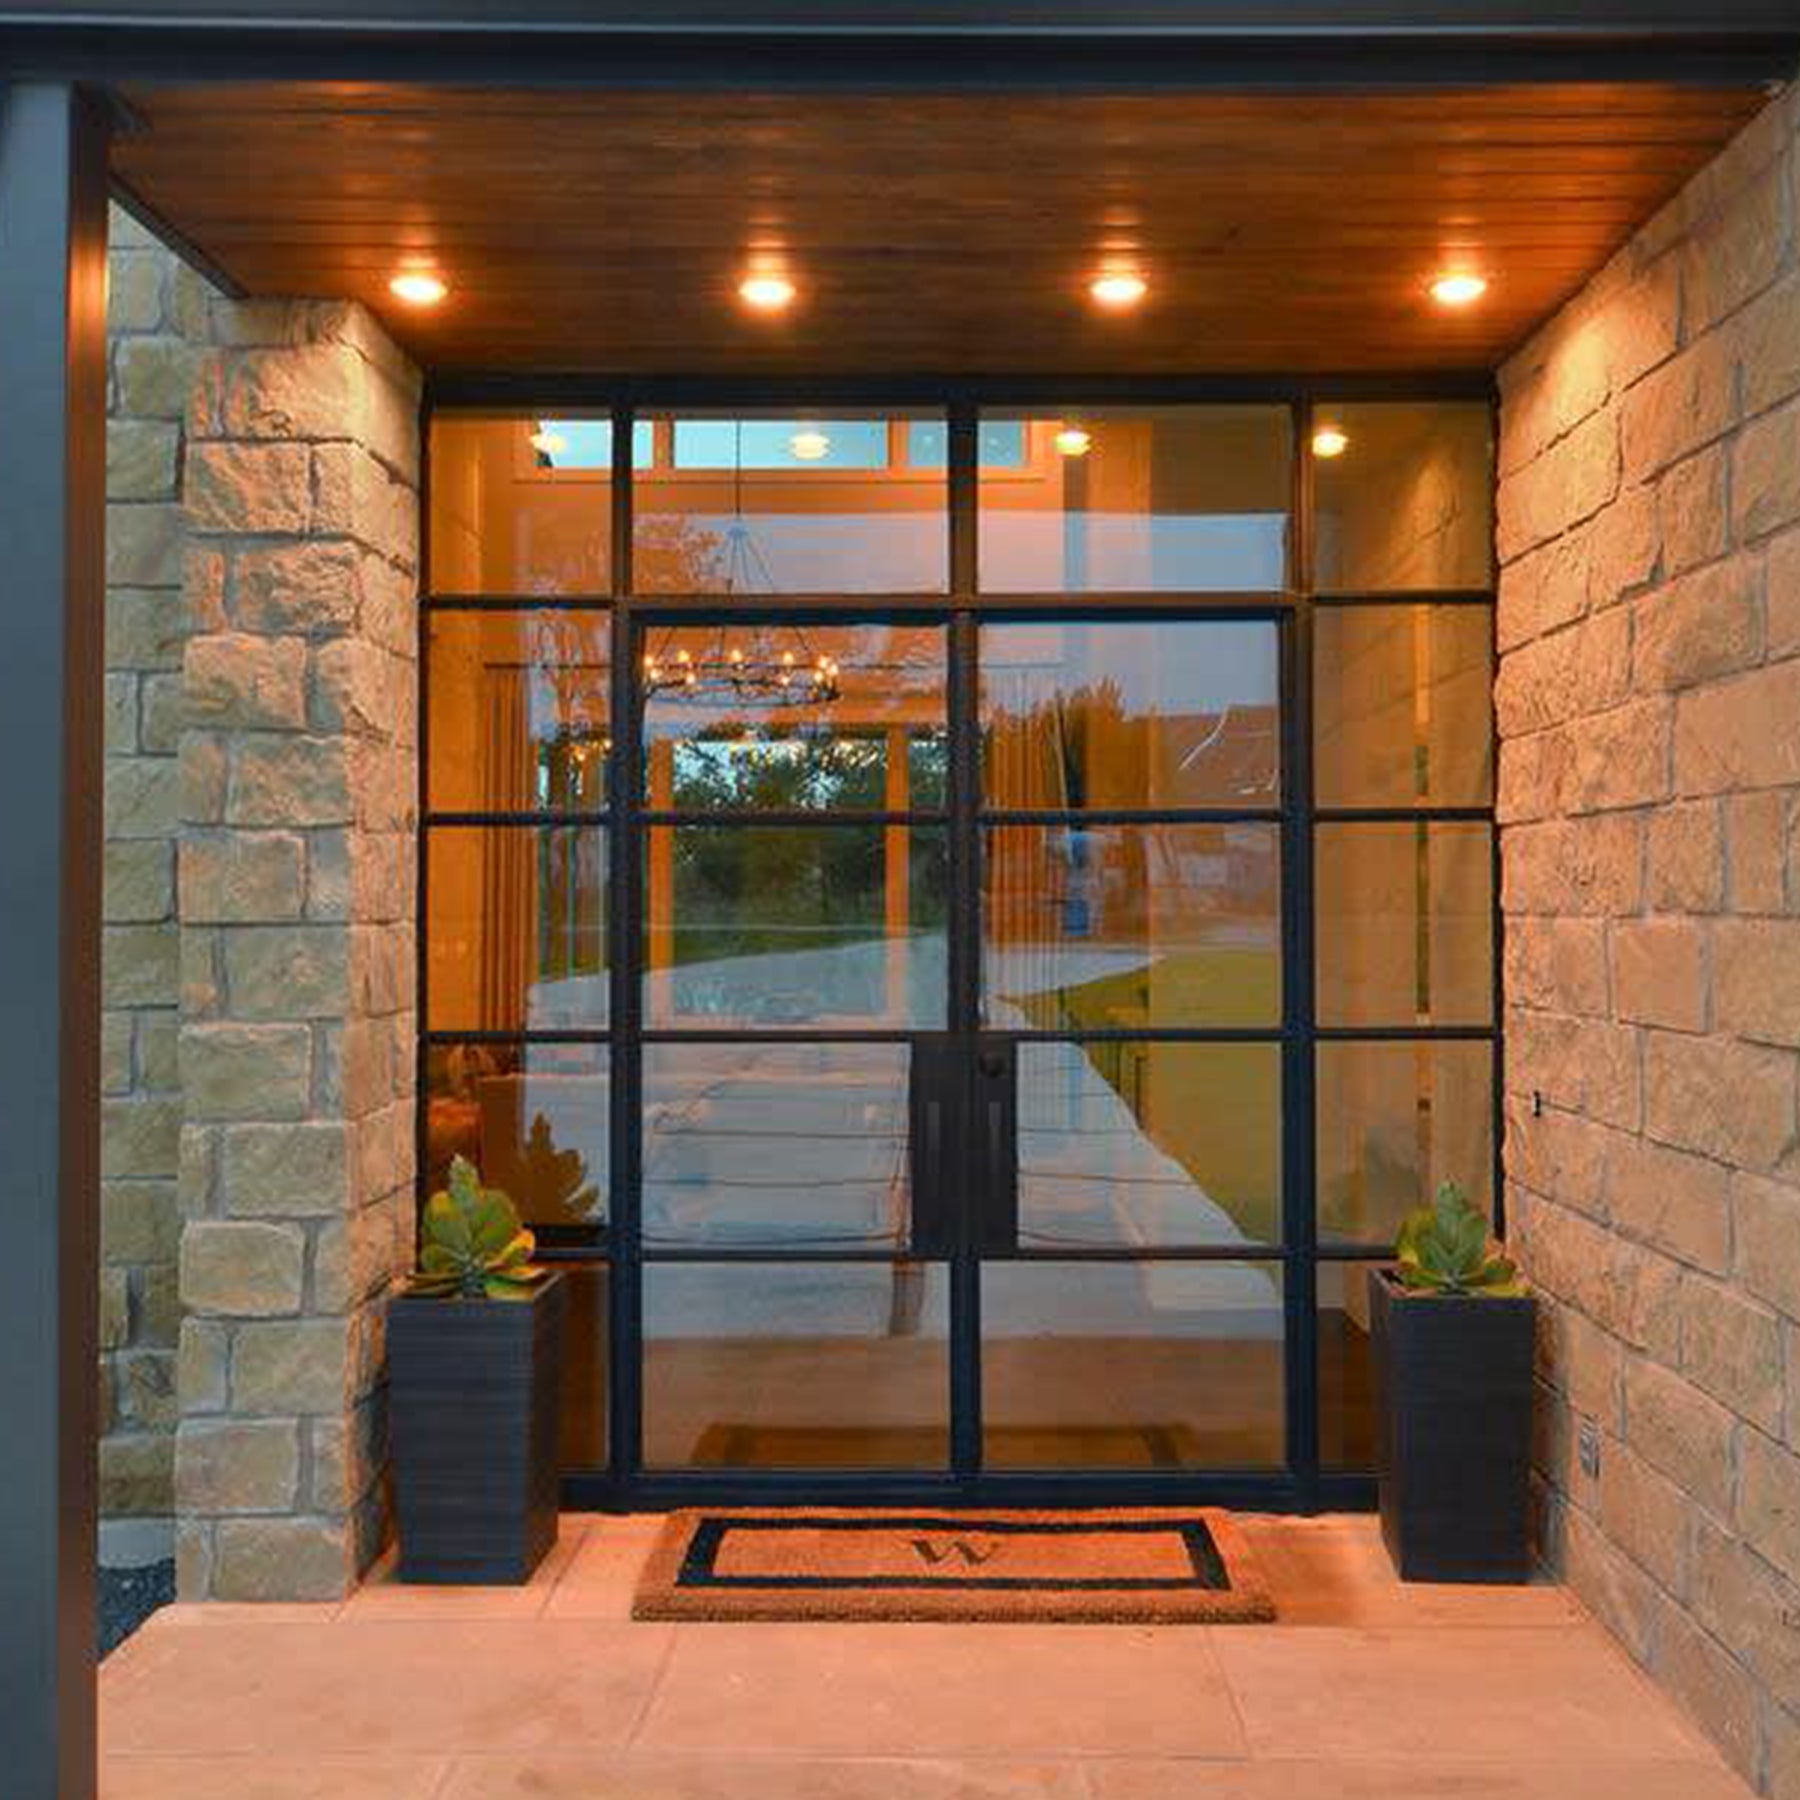 gloryirondoors insulated modern design steel french double doors with transom